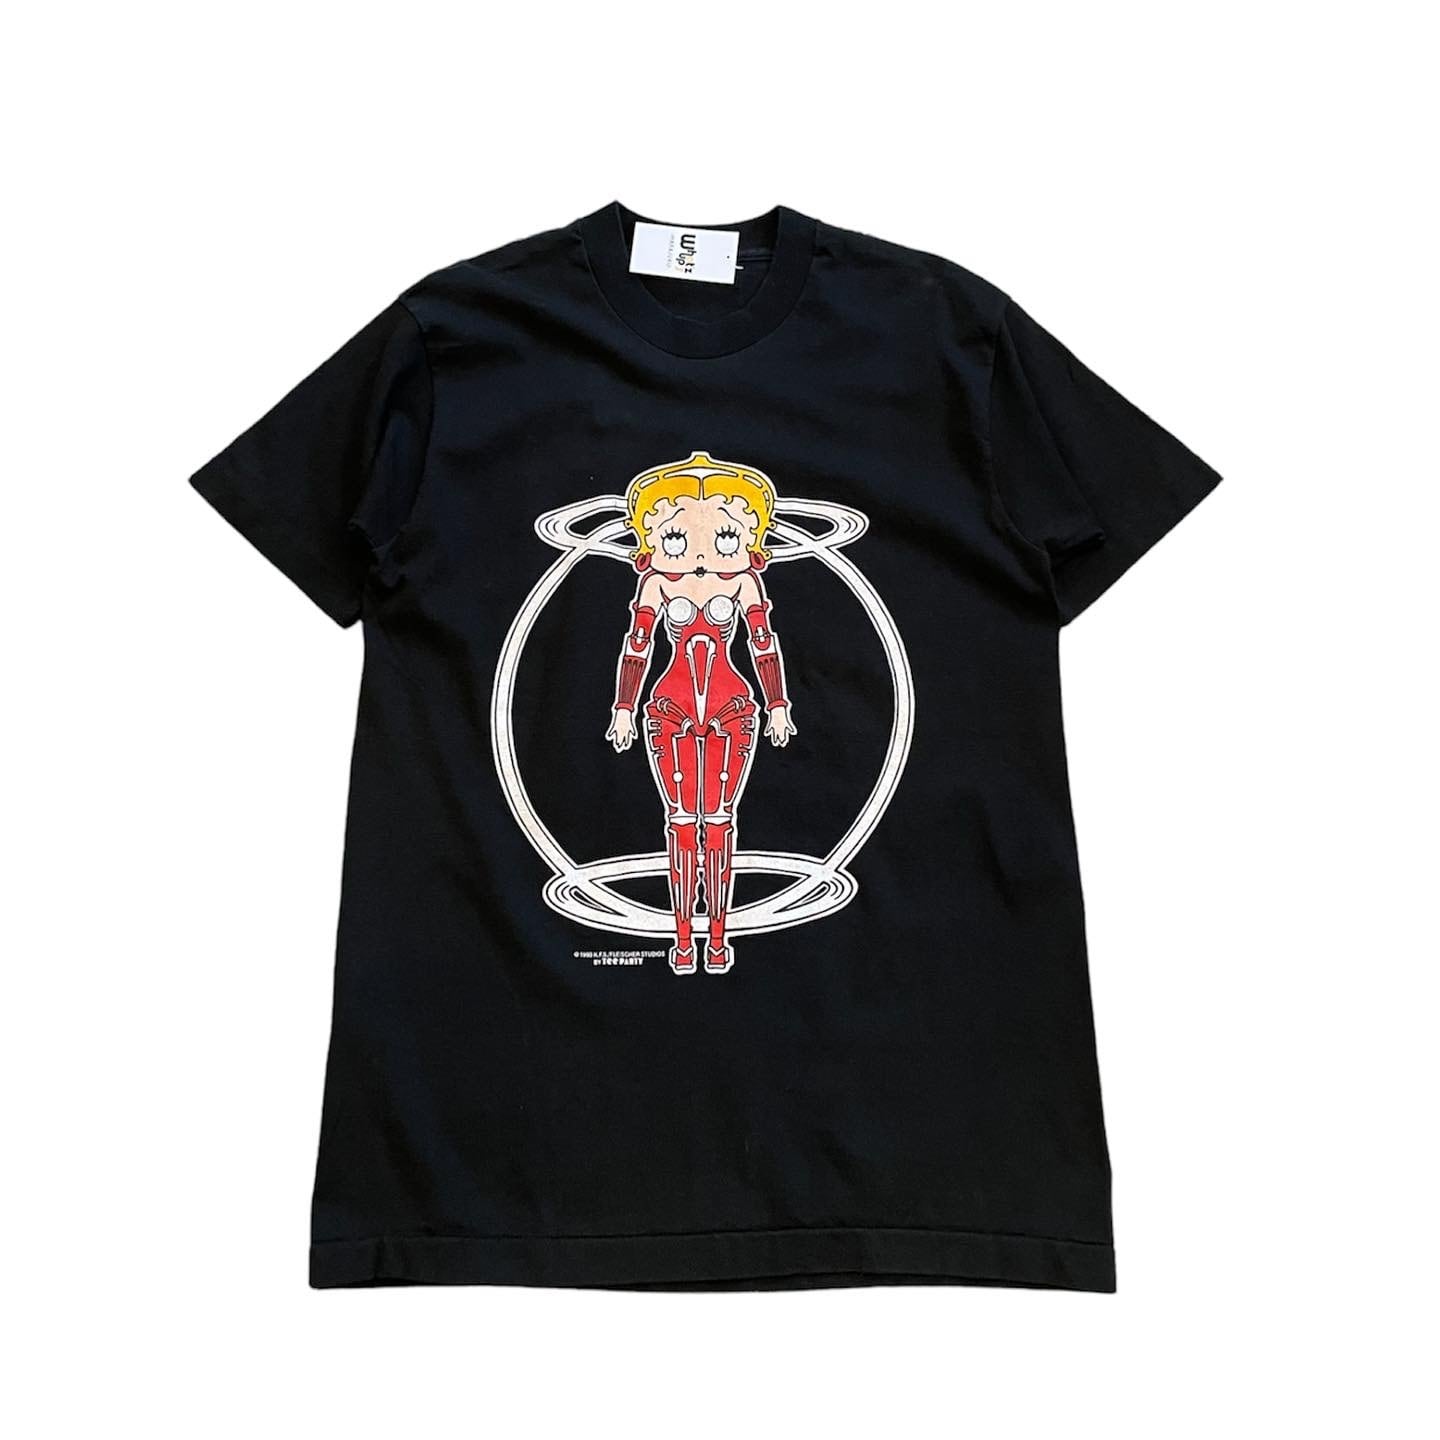 Special!! 90s BETTY BOOP 